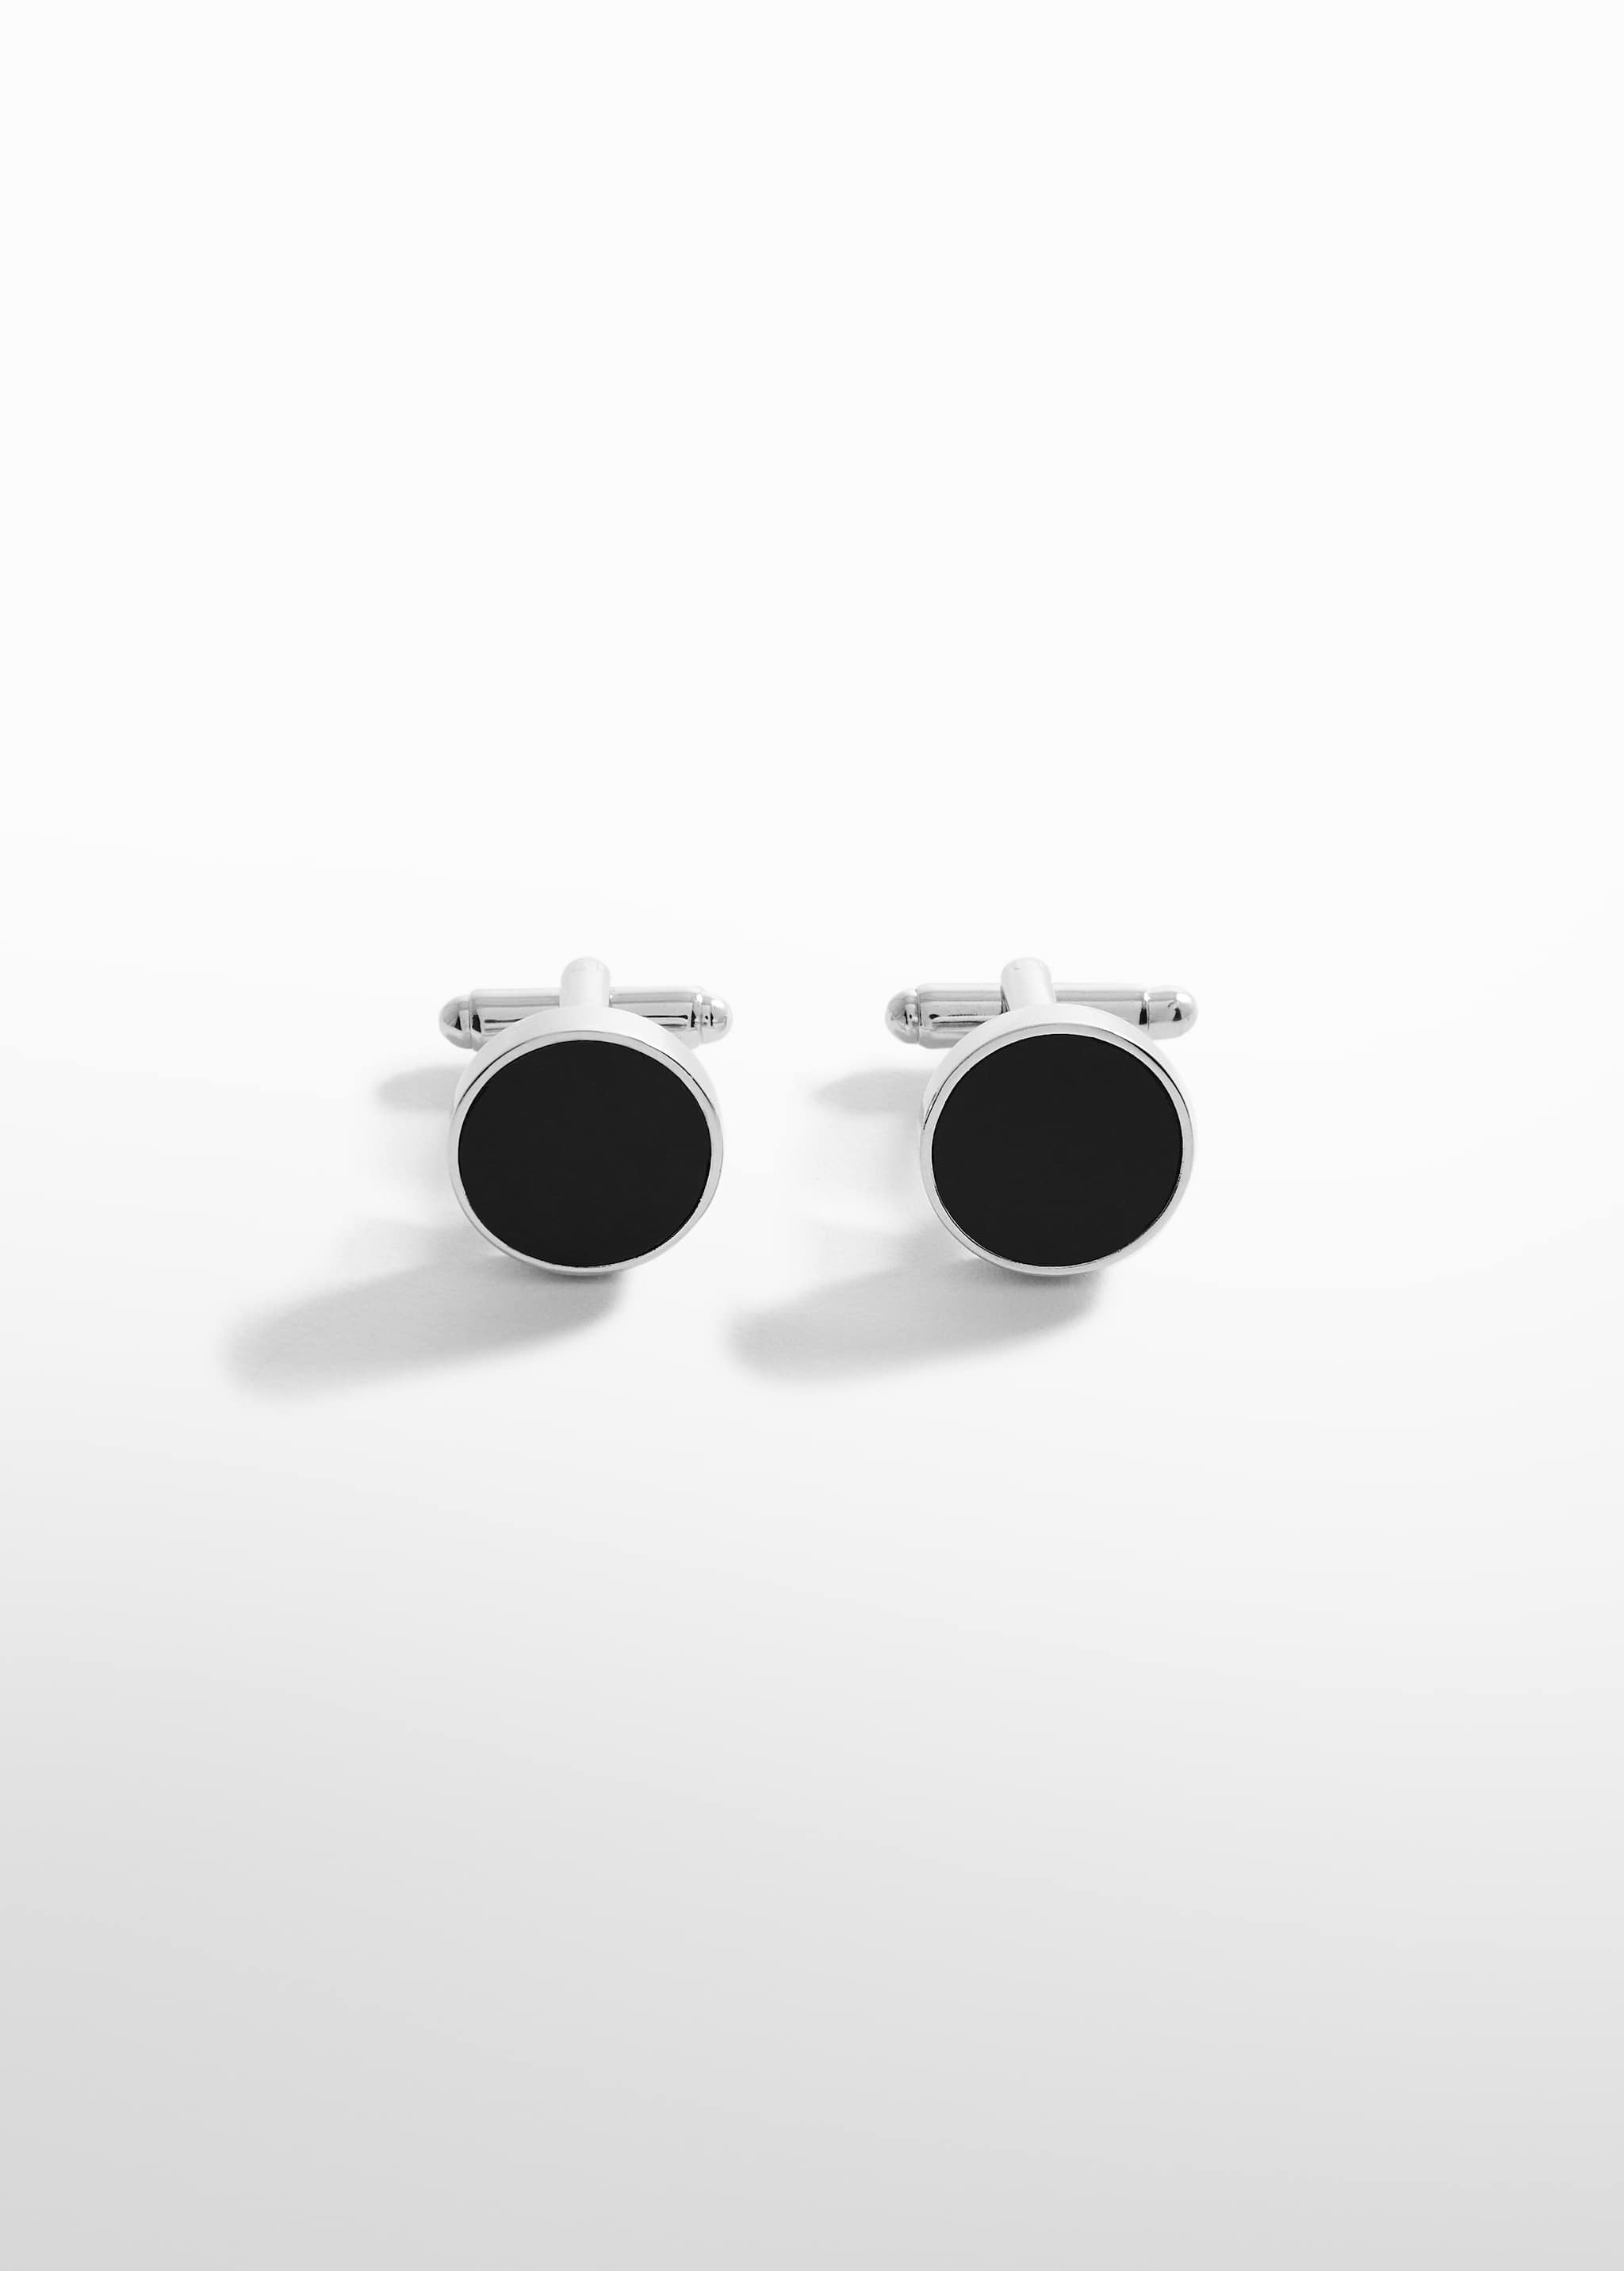 Round black cufflinks - Article without model